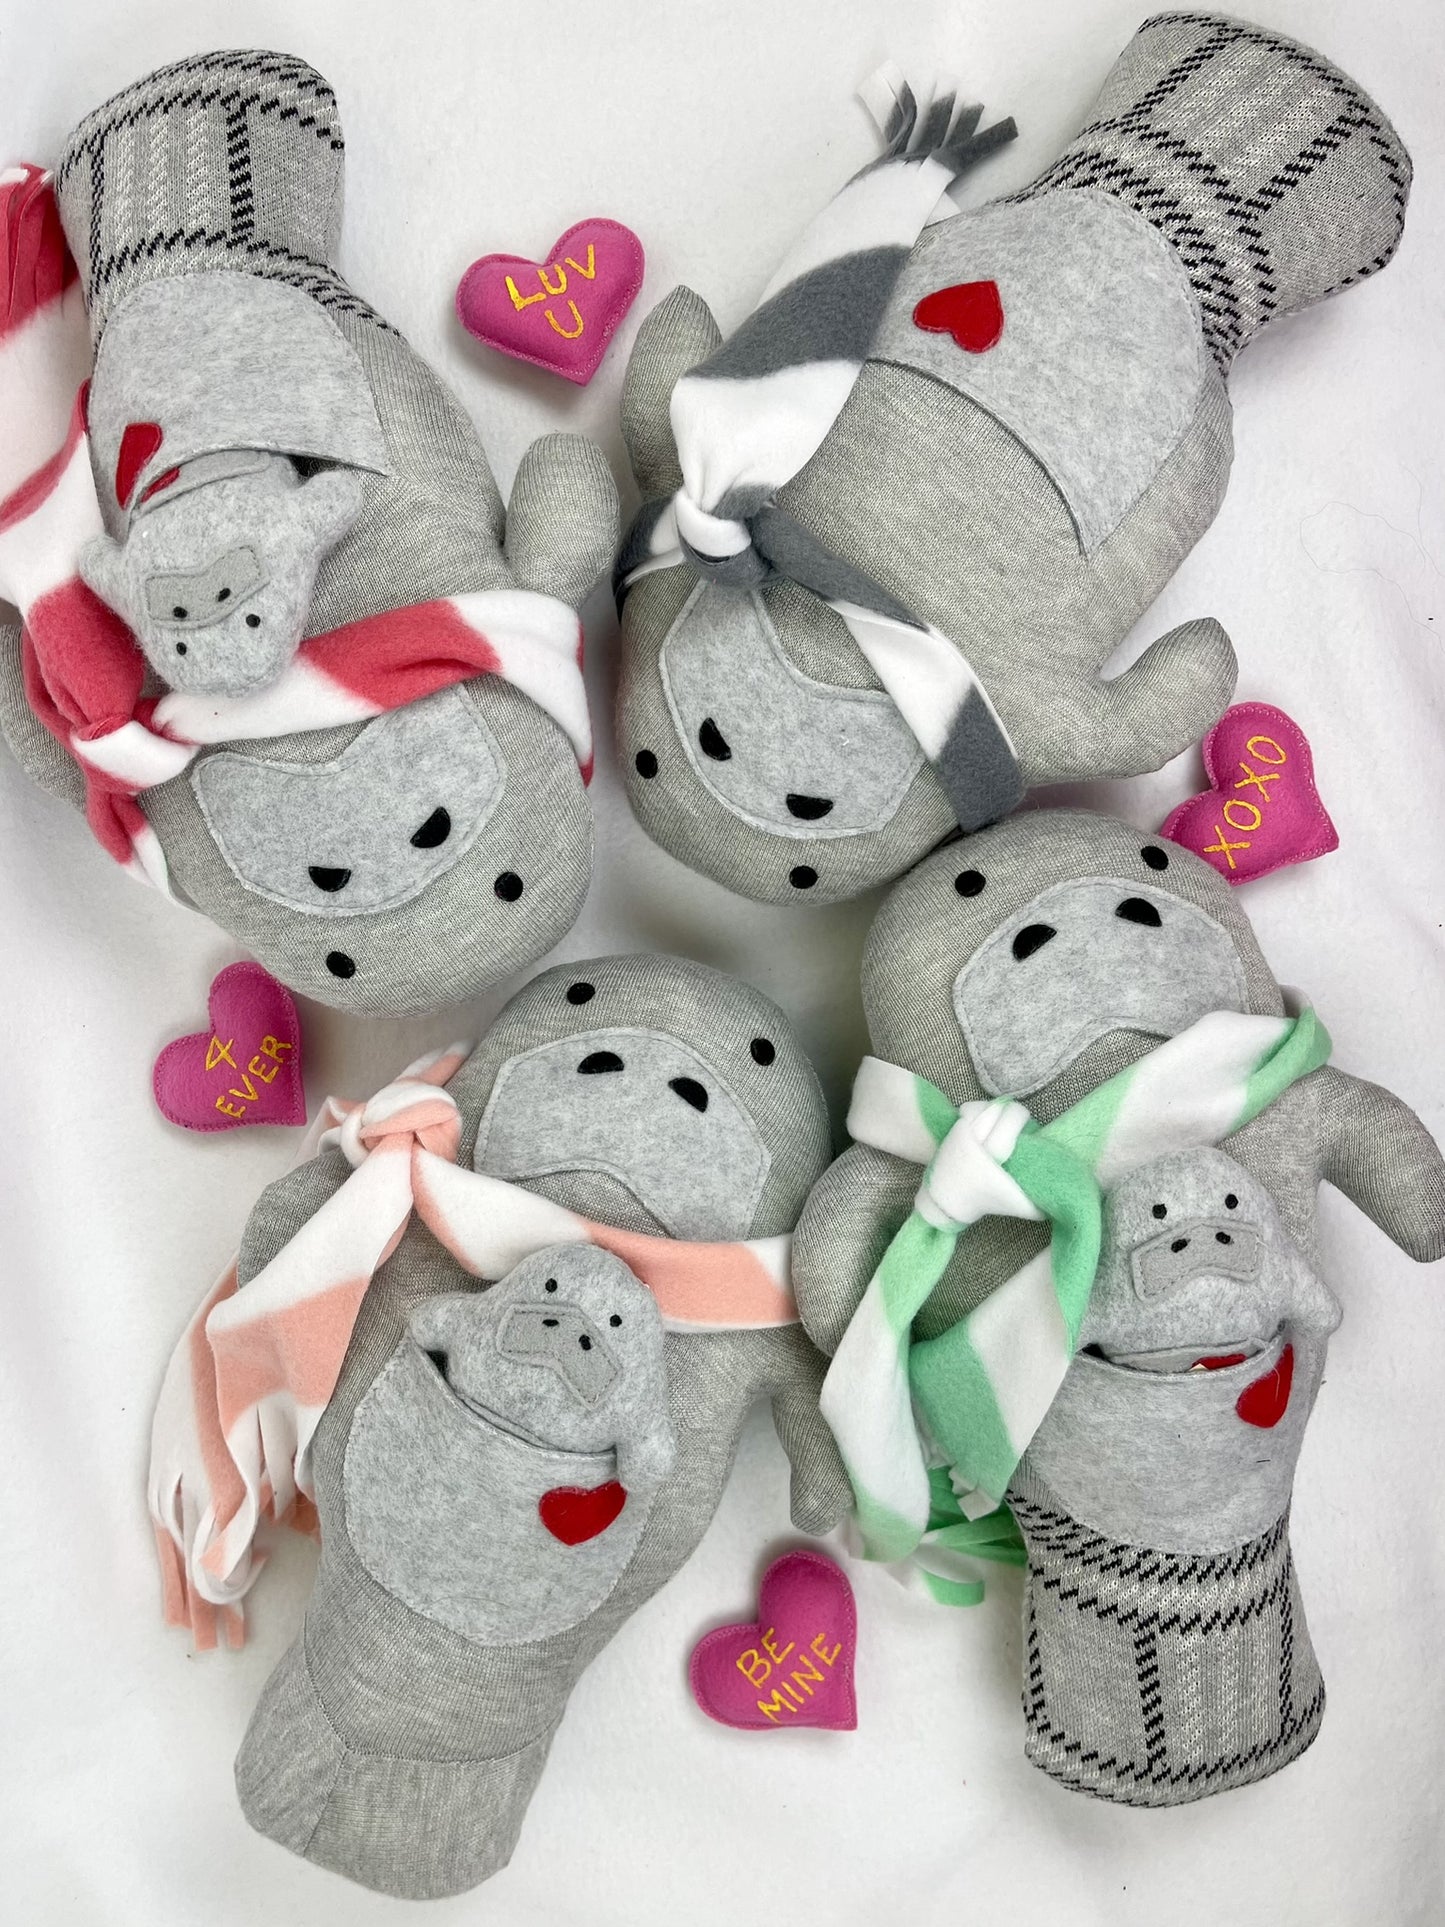 manatee stuffed animals with scarfs and babies in pockets